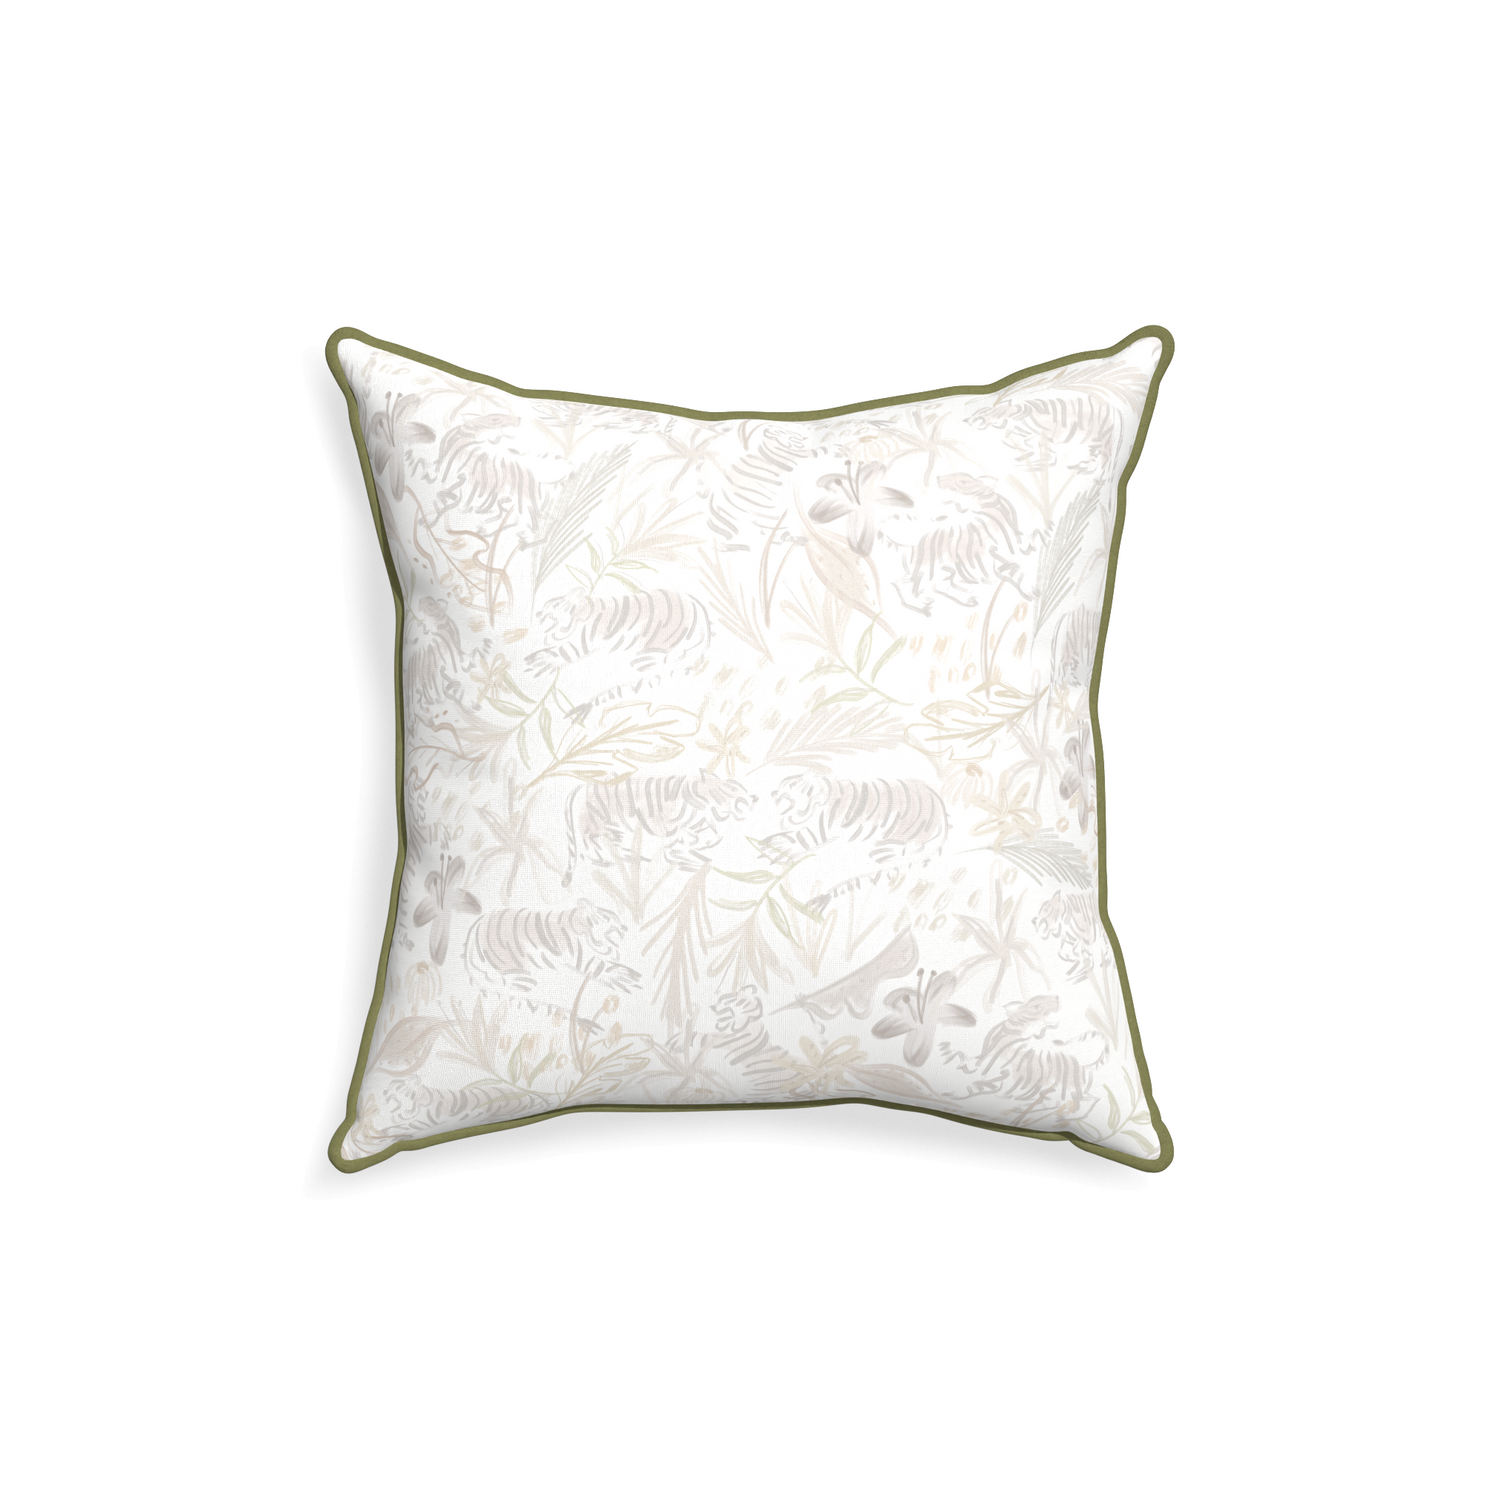 18-square frida sand custom pillow with moss piping on white background